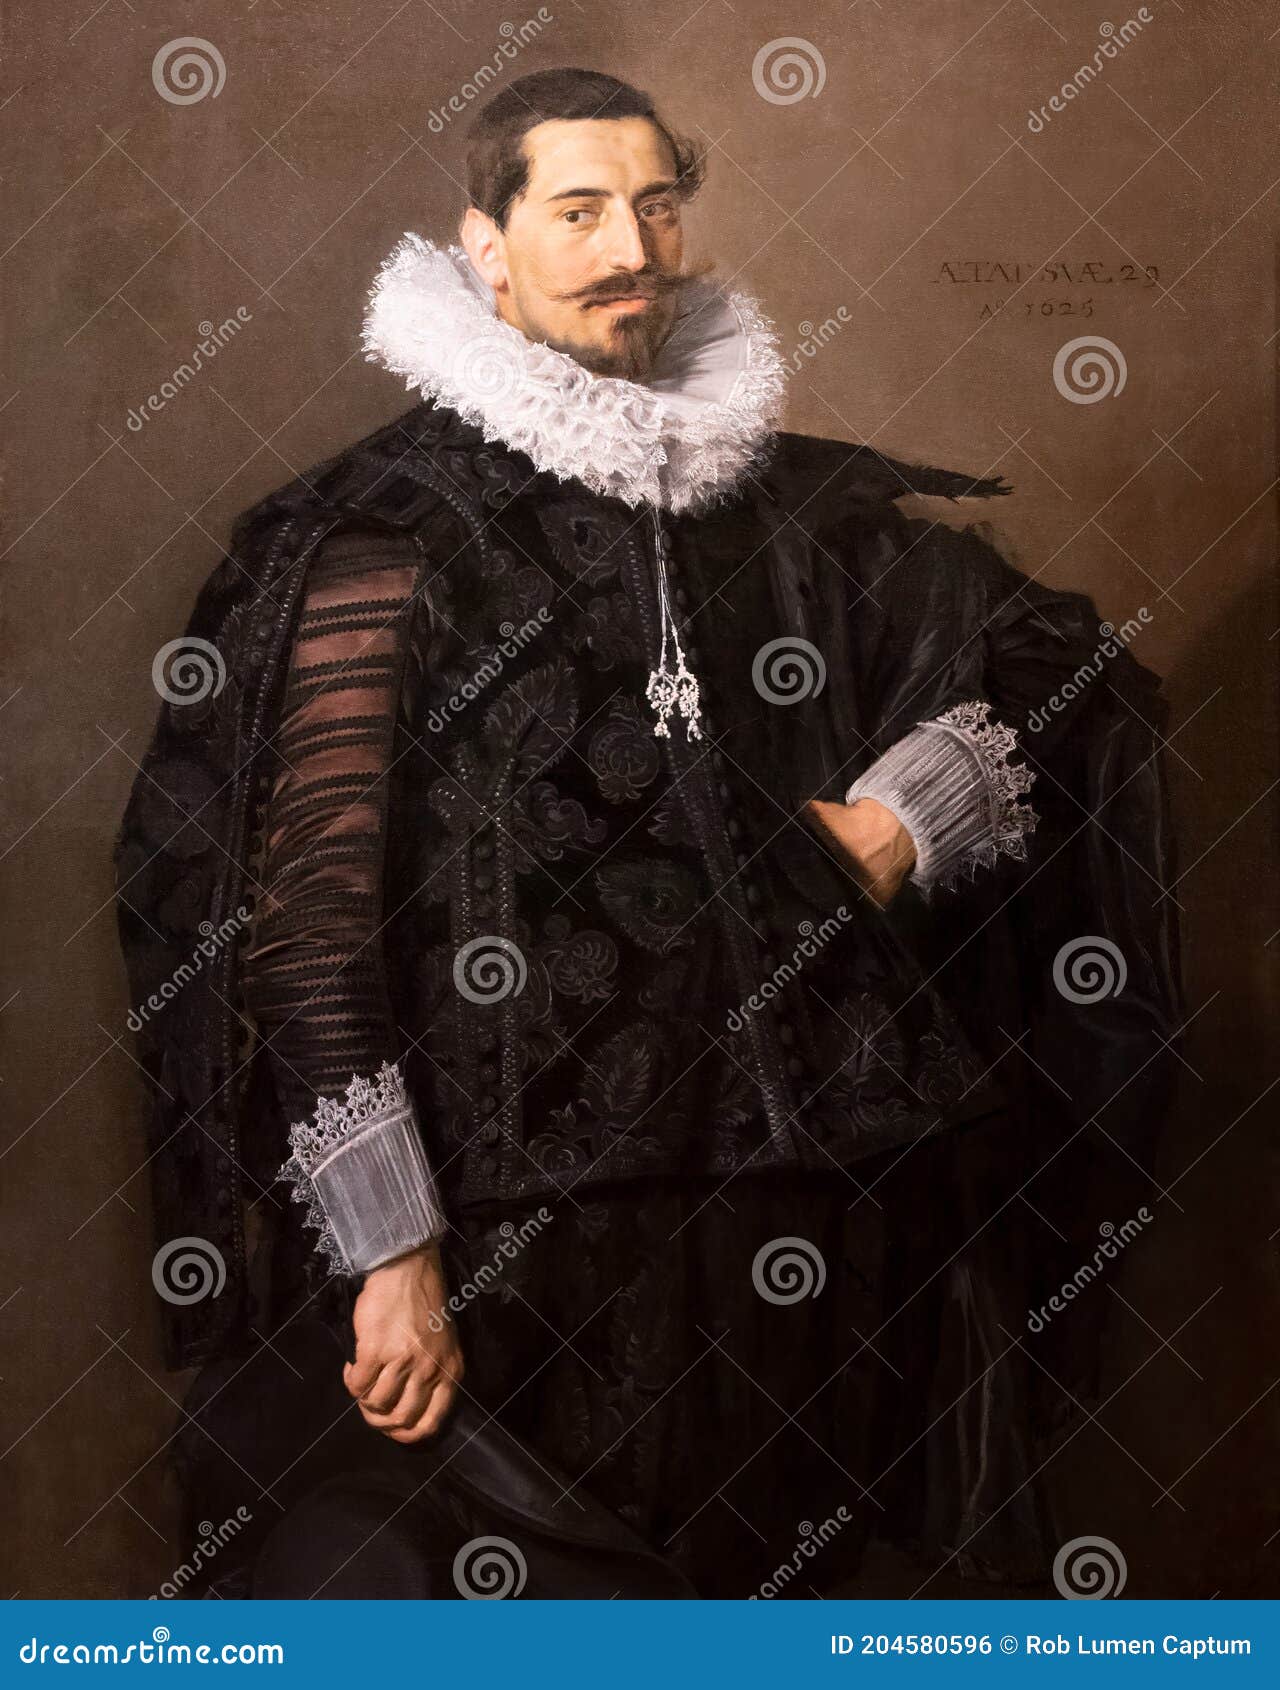 portrait of jacop olycan, 1625 painting by frans hals